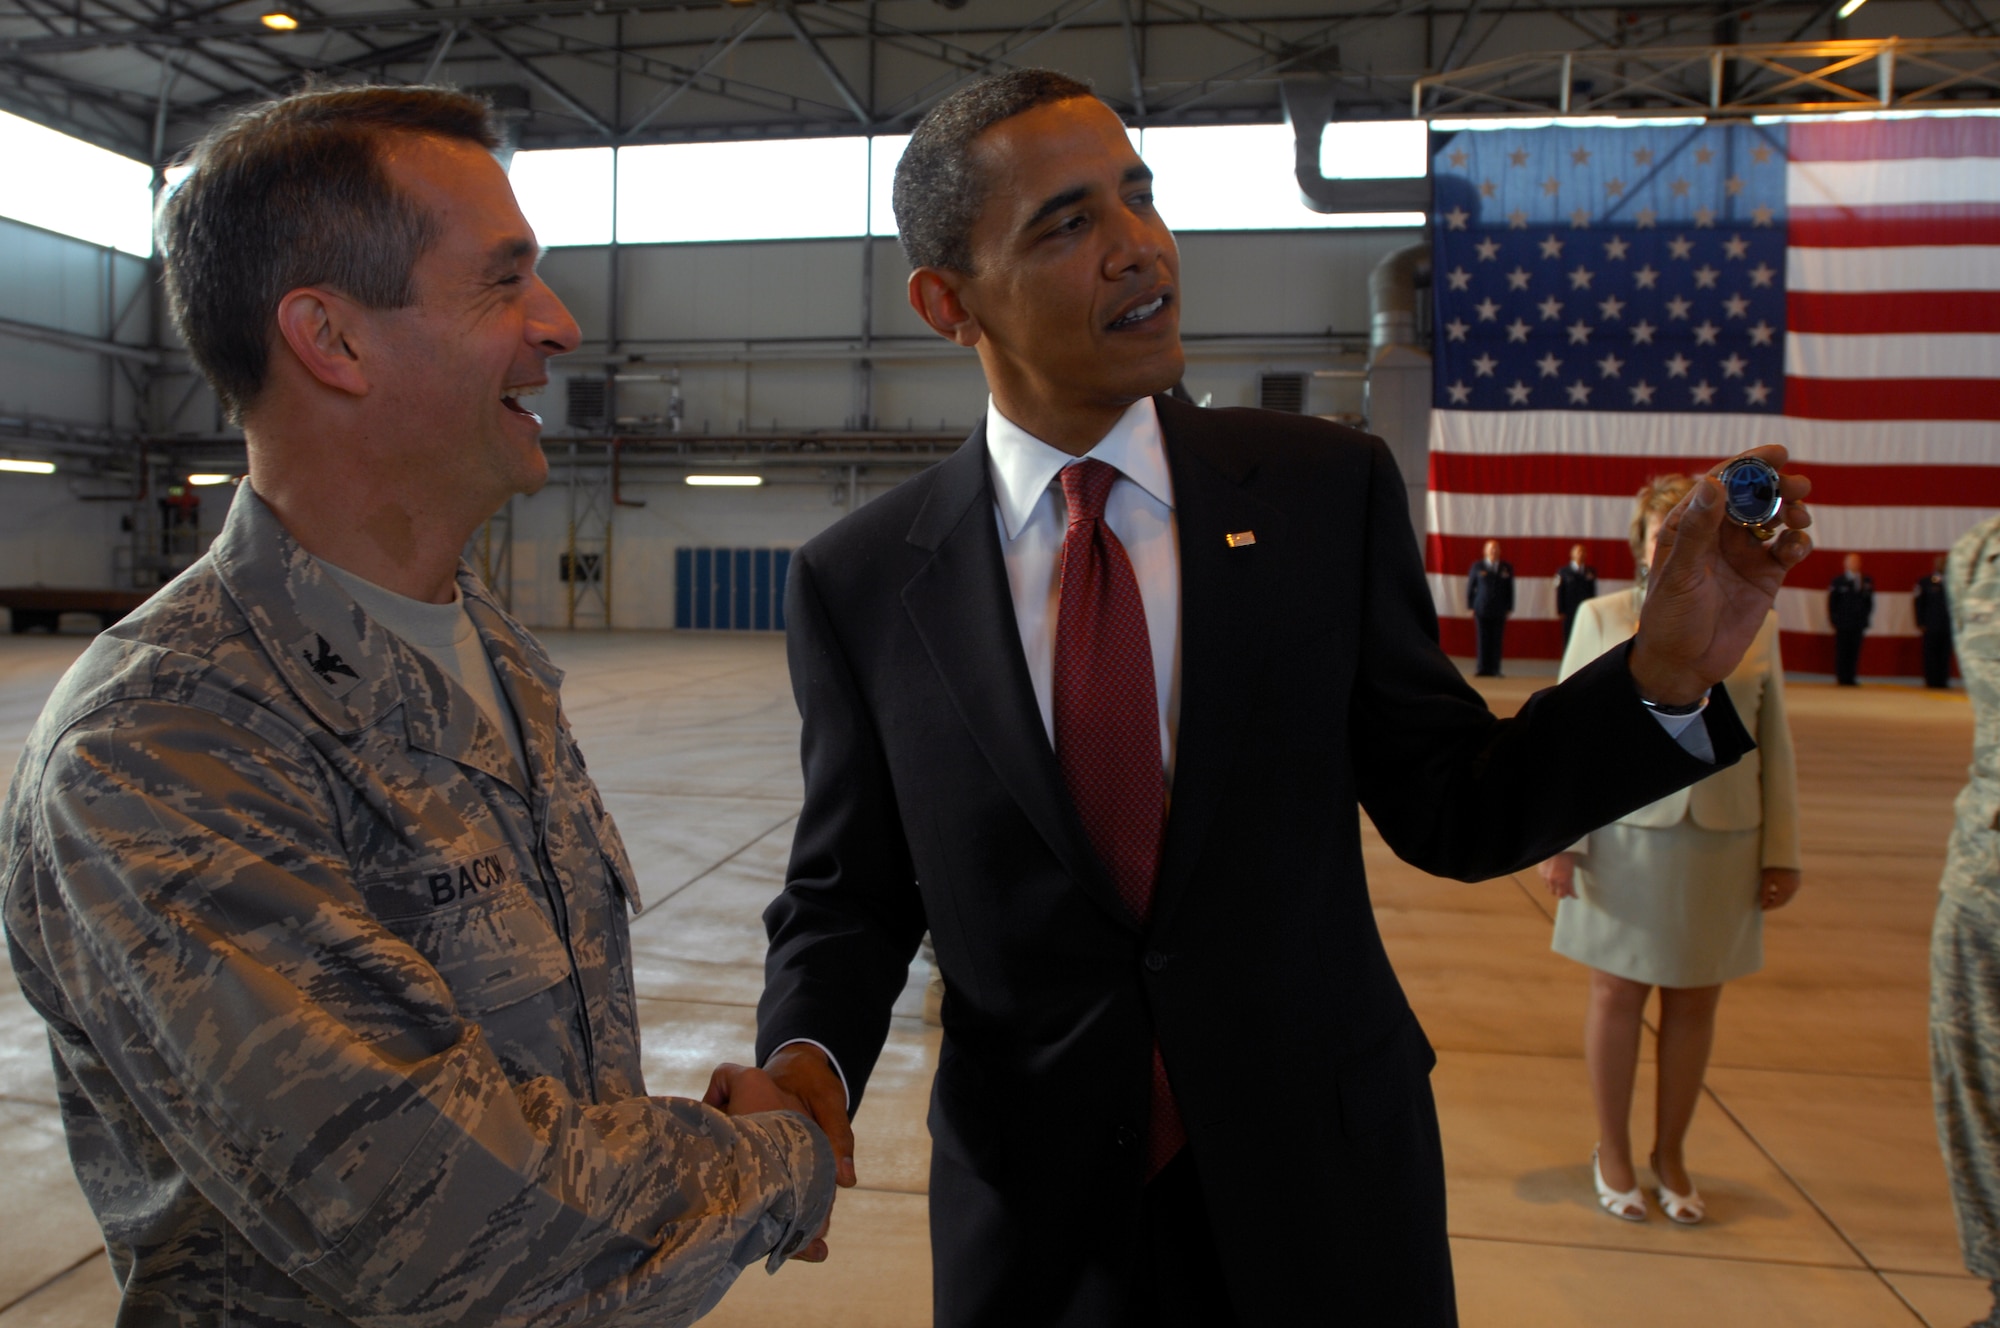 President Barak Obama shows off a 435th Air Base Wing coin given to him by Col. Don Bacon, 435th ABW commander, June 5, 2009, Ramstein Air Base, Germany. President Obama arrived at Ramstein en route to Landstuhl Regional Medical Center, Germany to visit wounded U.S. military members being treated there.(U.S. Air Force photo by Senior Airman Kenny Holston)